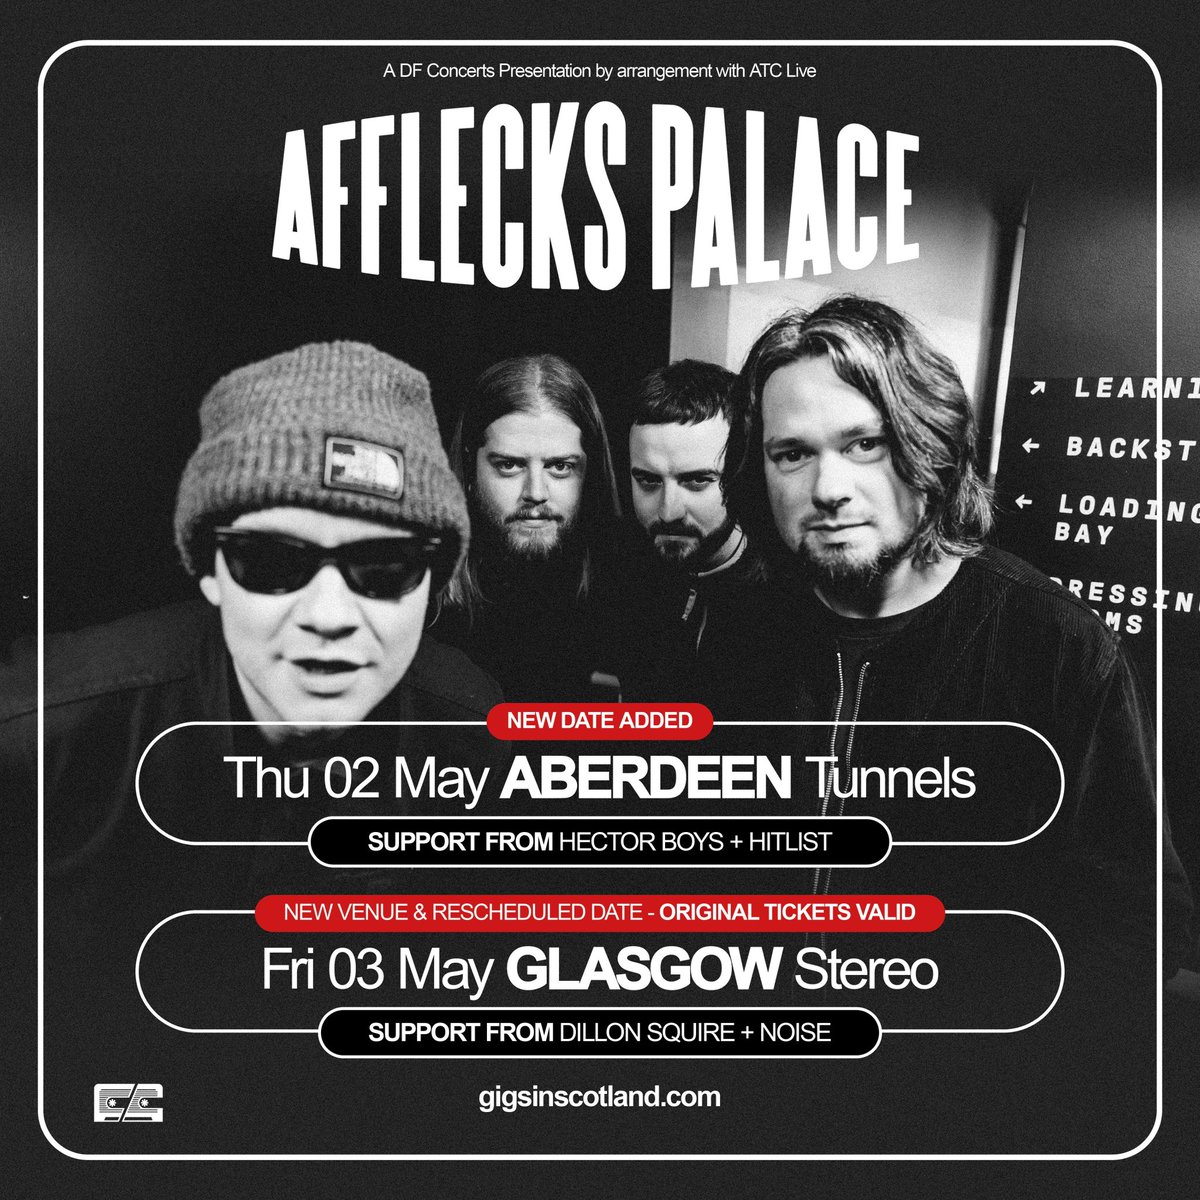 Super pleased to announce support for our shows in Scotland this May - Dillon Squire (son of John Squire), Noise, Hector Boys & Hitlist 🏴󠁧󠁢󠁳󠁣󠁴󠁿 TICKETS: tix.to/affleckspalace